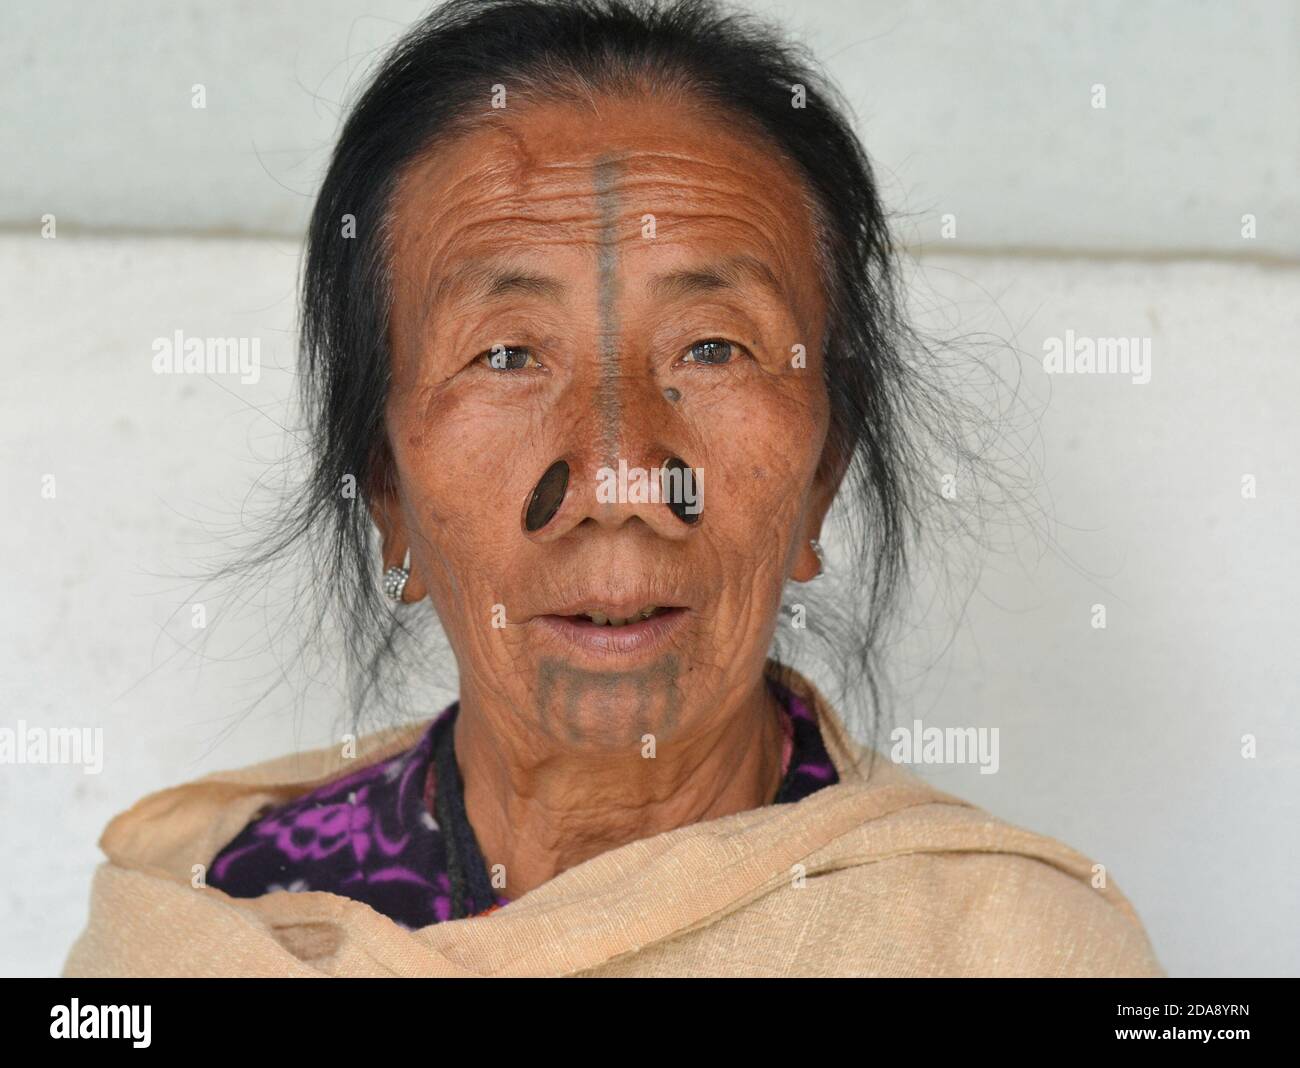 Elderly Northeast Indian Apatani ethnic minority tribal woman with black wooden nose plugs and traditional face tattoo poses for the camera. Stock Photo